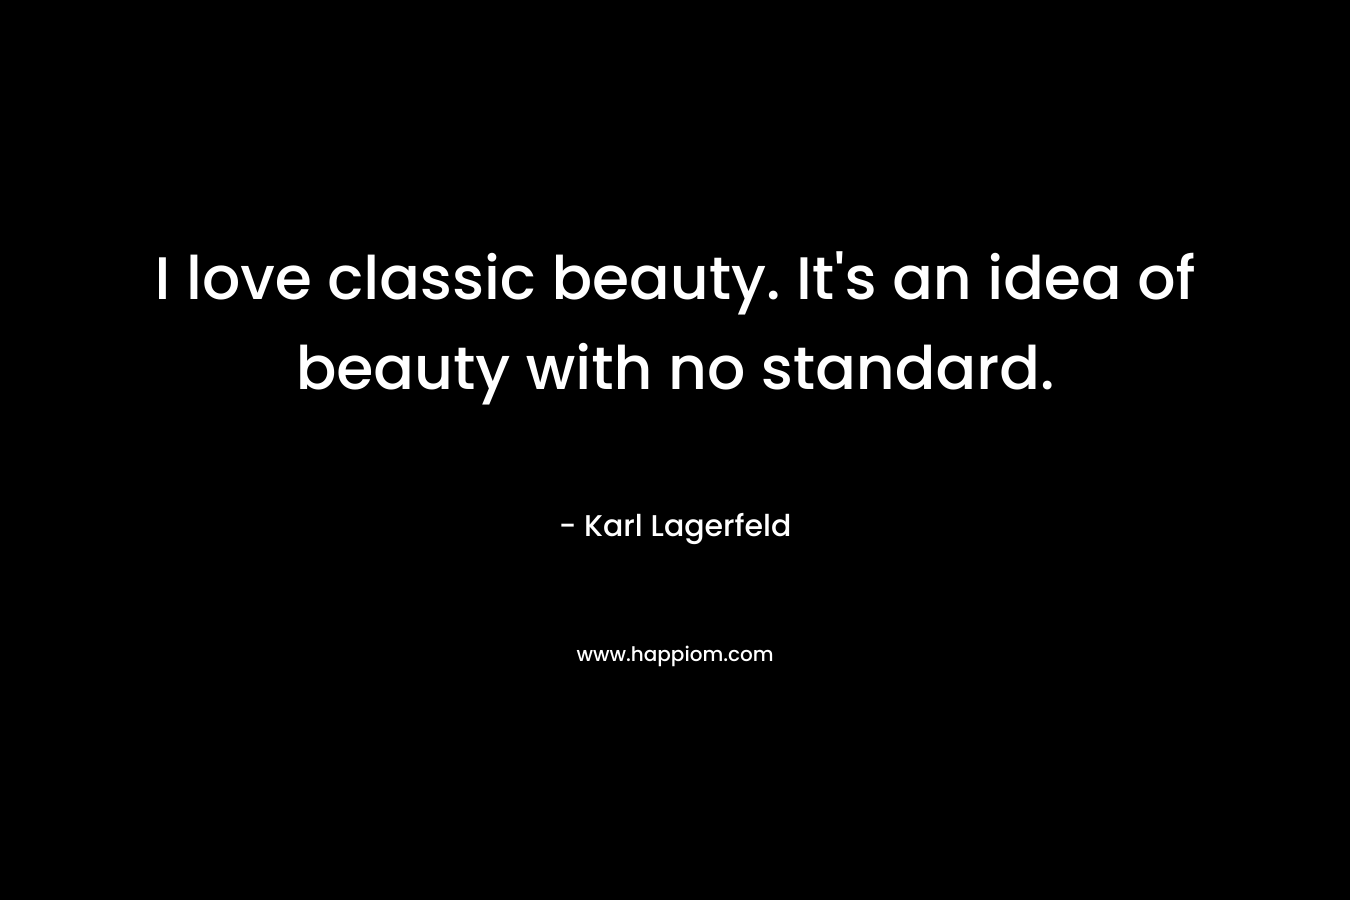 I love classic beauty. It's an idea of beauty with no standard.